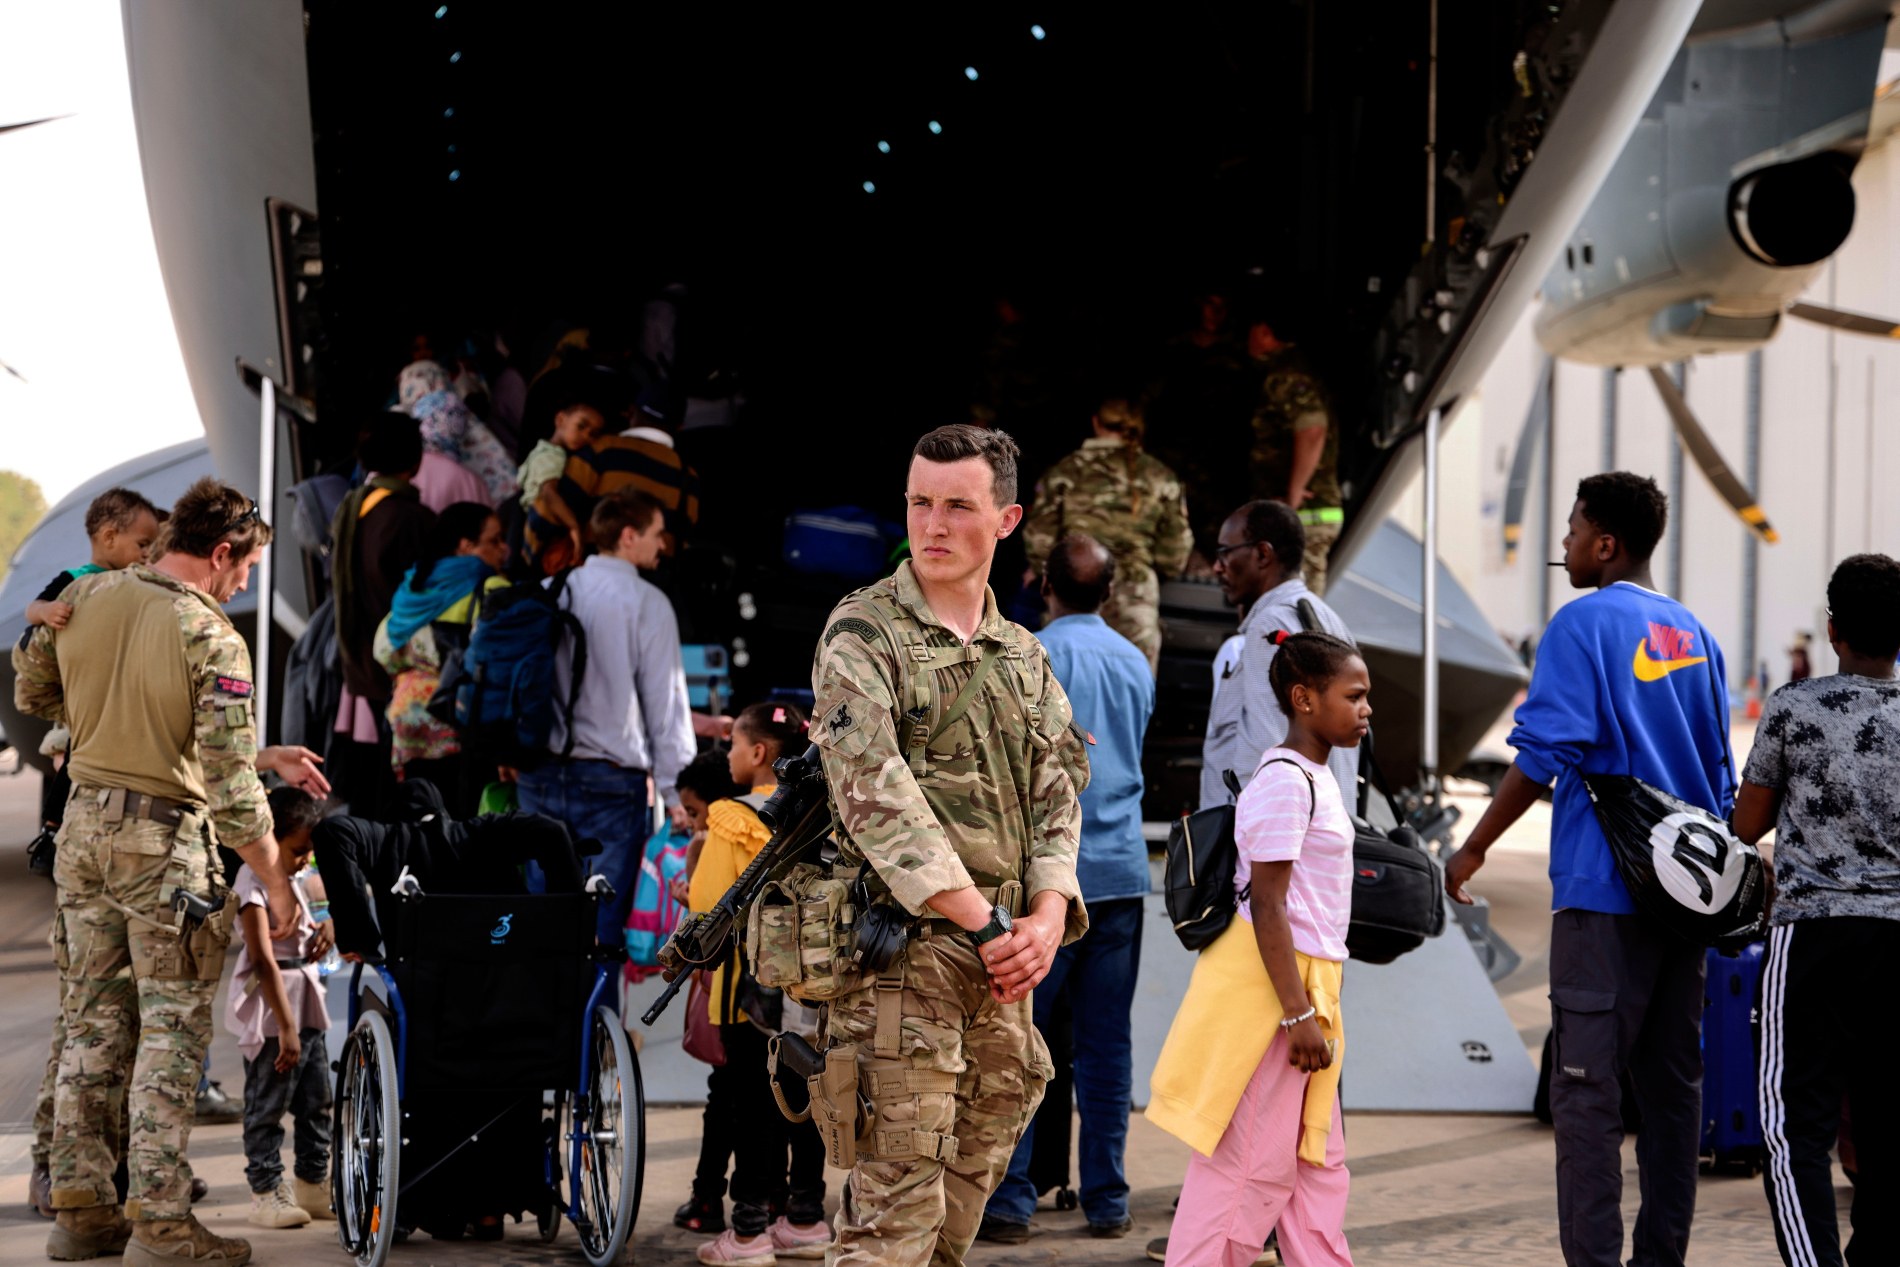 Aircraft based at RAF Brize Norton have played a key role in carrying out the evacuation operation of British citizens from Sudan.